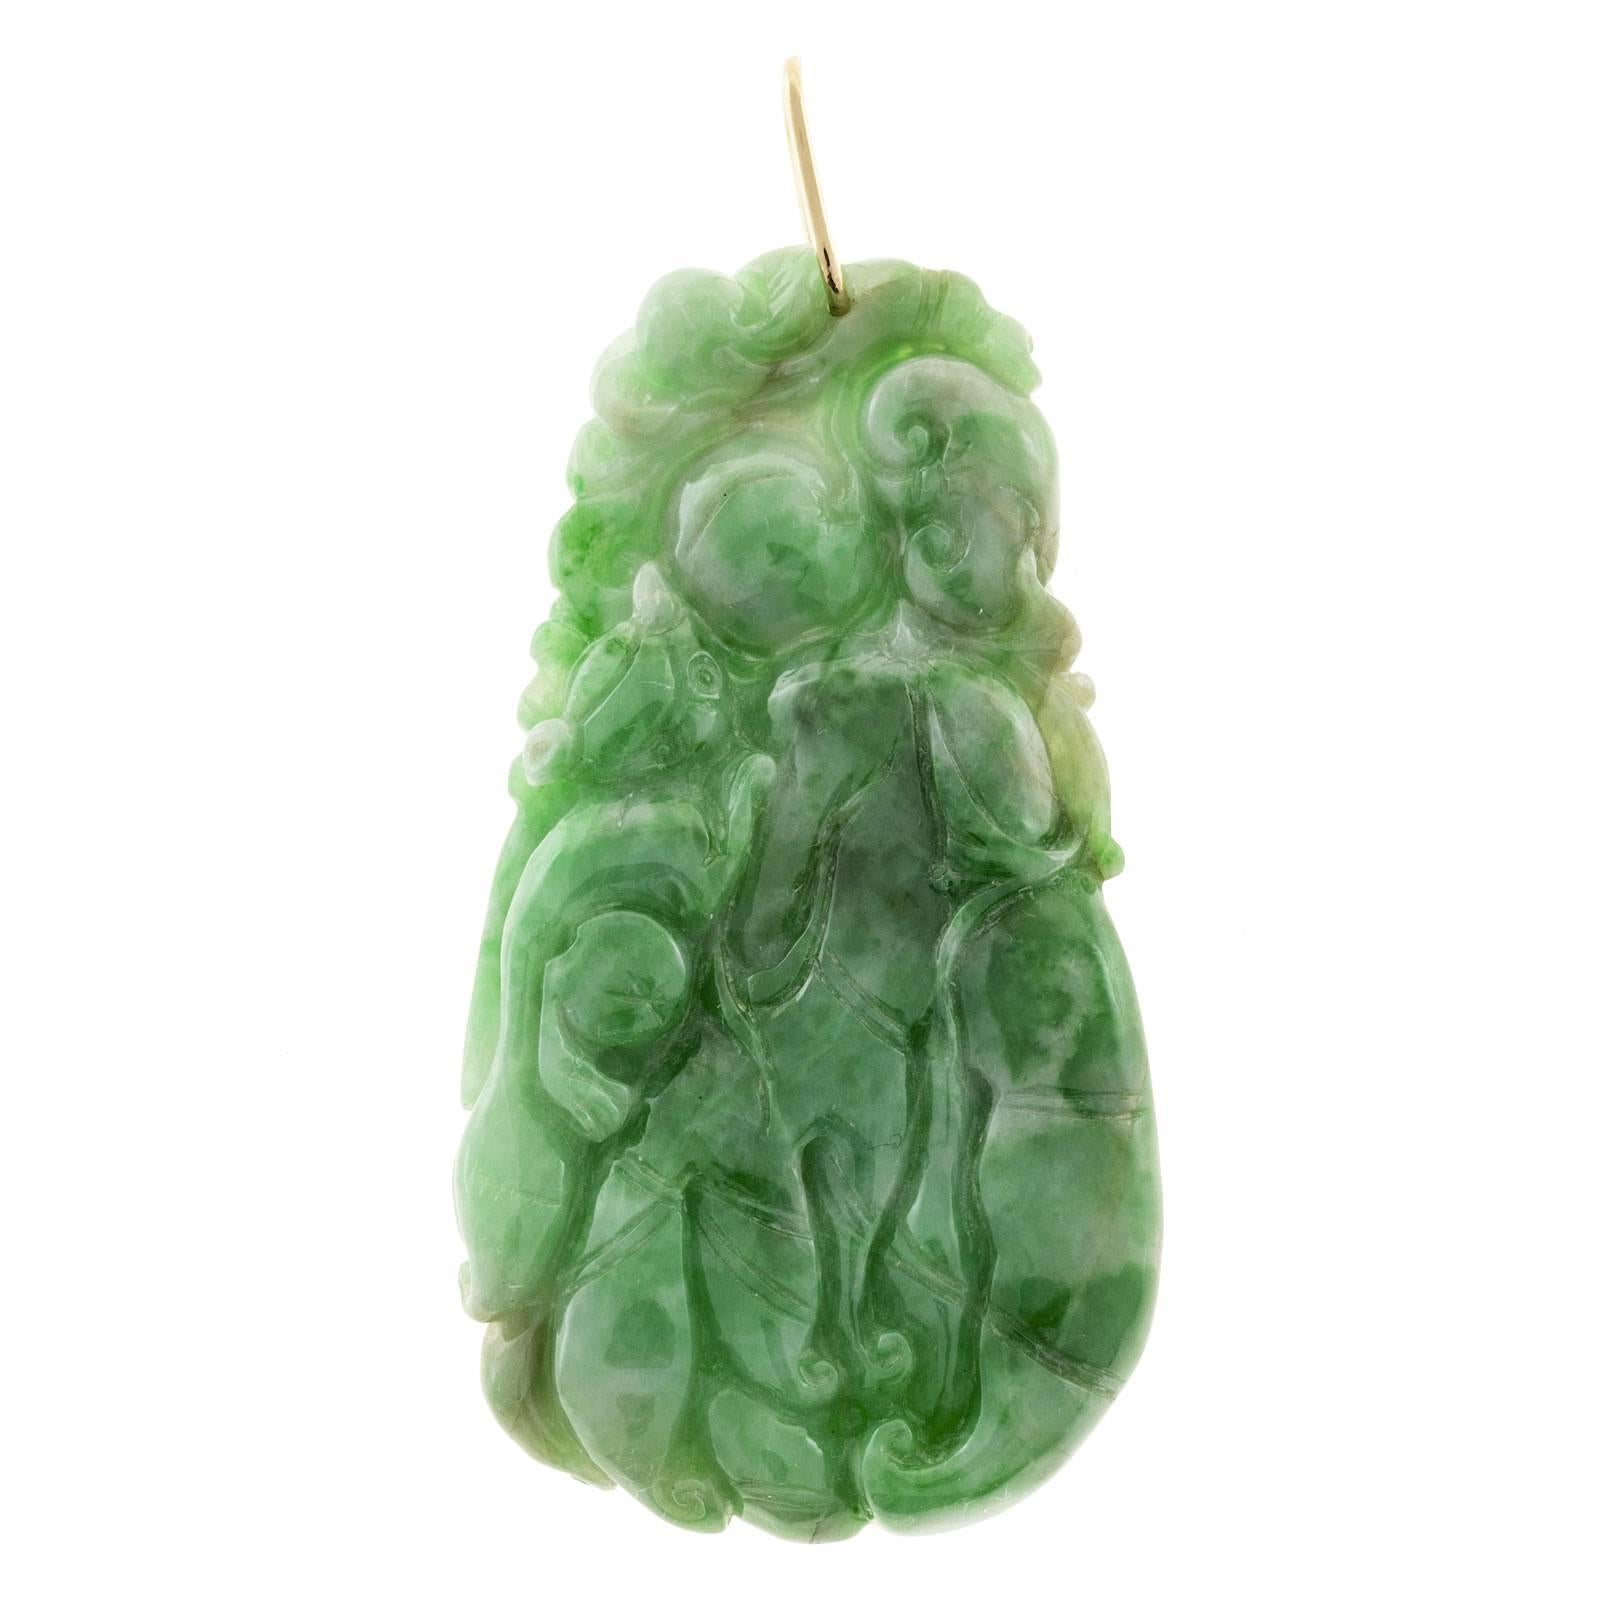 Natural Jadeite Jade carved pendant with a simple 14k yellow gold pendant loop.  Pendant loop tested 14k variegated green color extra fine GIA certified 5141648724. natural Jadeite Jade large double sided carving deeply carved flowing design

59.9 x